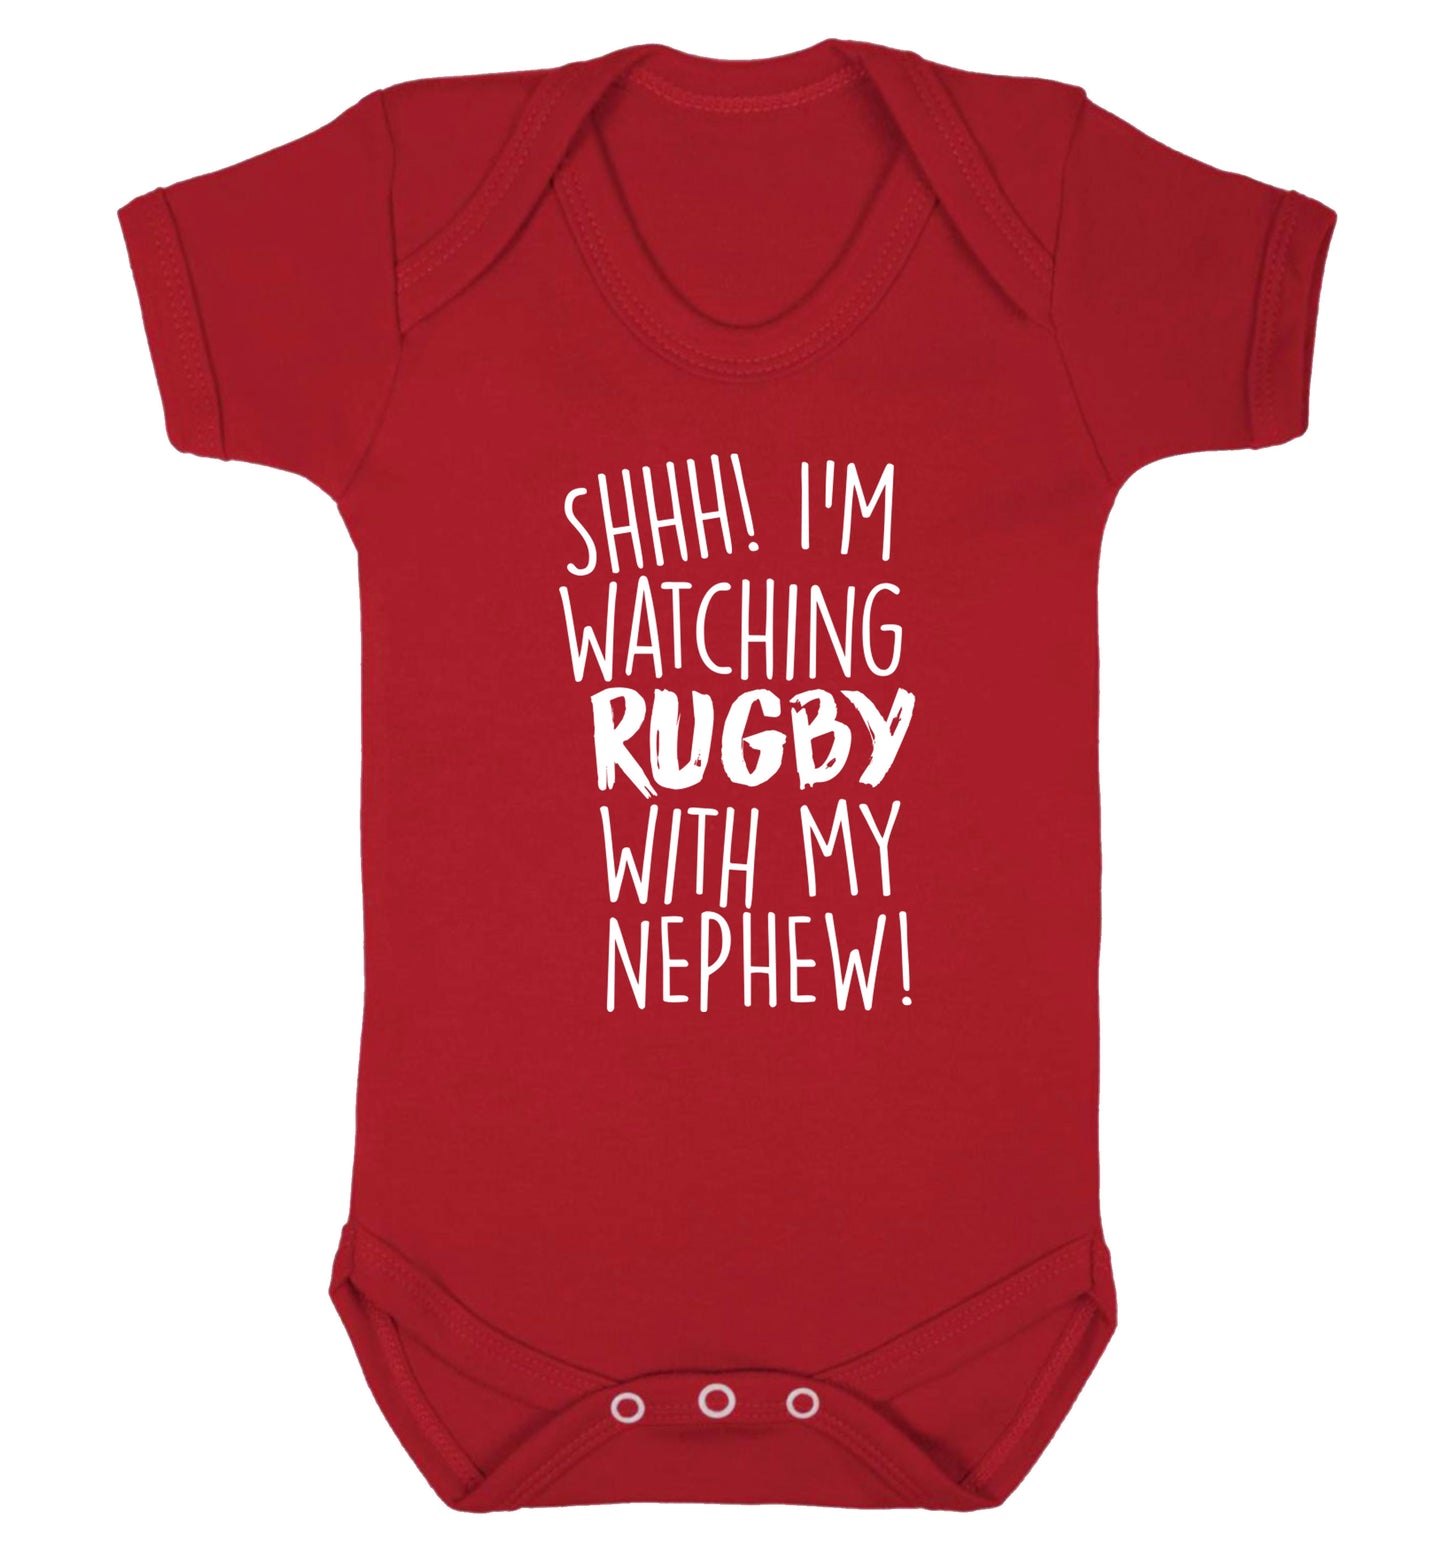 Shh.. I'm watching rugby with my nephew Baby Vest red 18-24 months